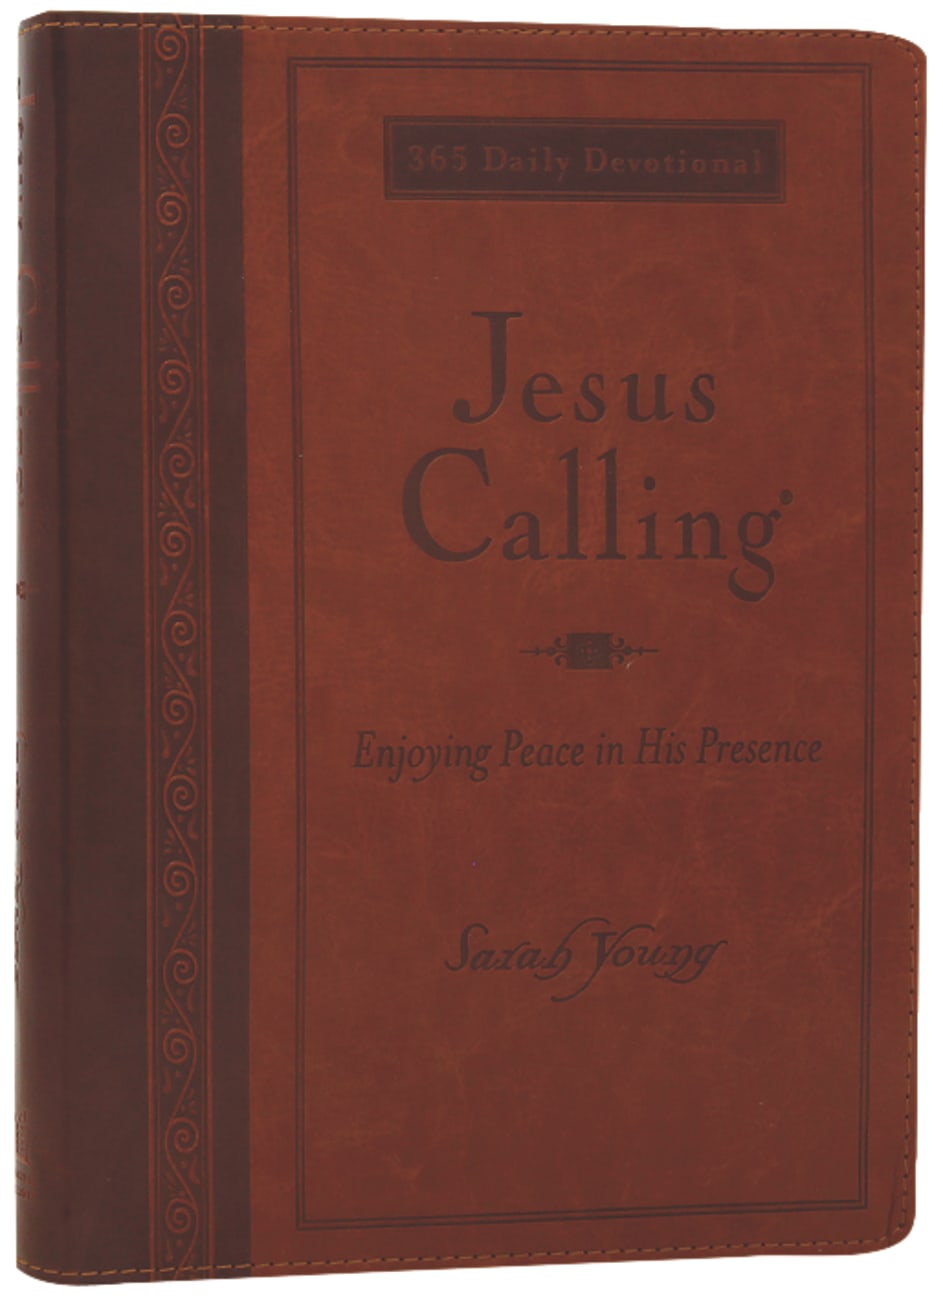 Jesus Calling Large Deluxe Edition Imitation Leather